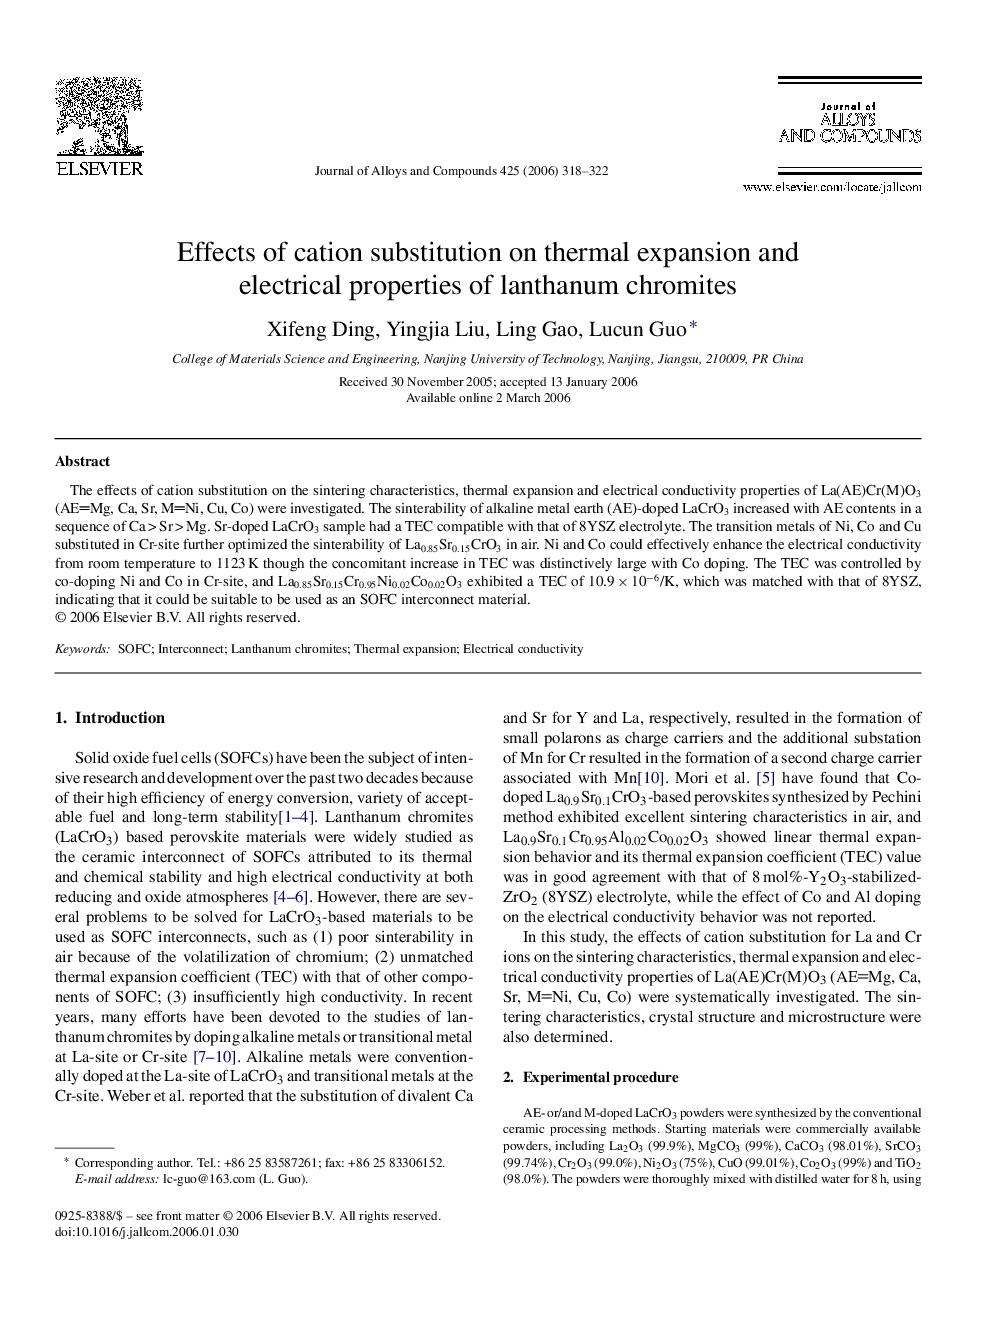 Effects of cation substitution on thermal expansion and electrical properties of lanthanum chromites